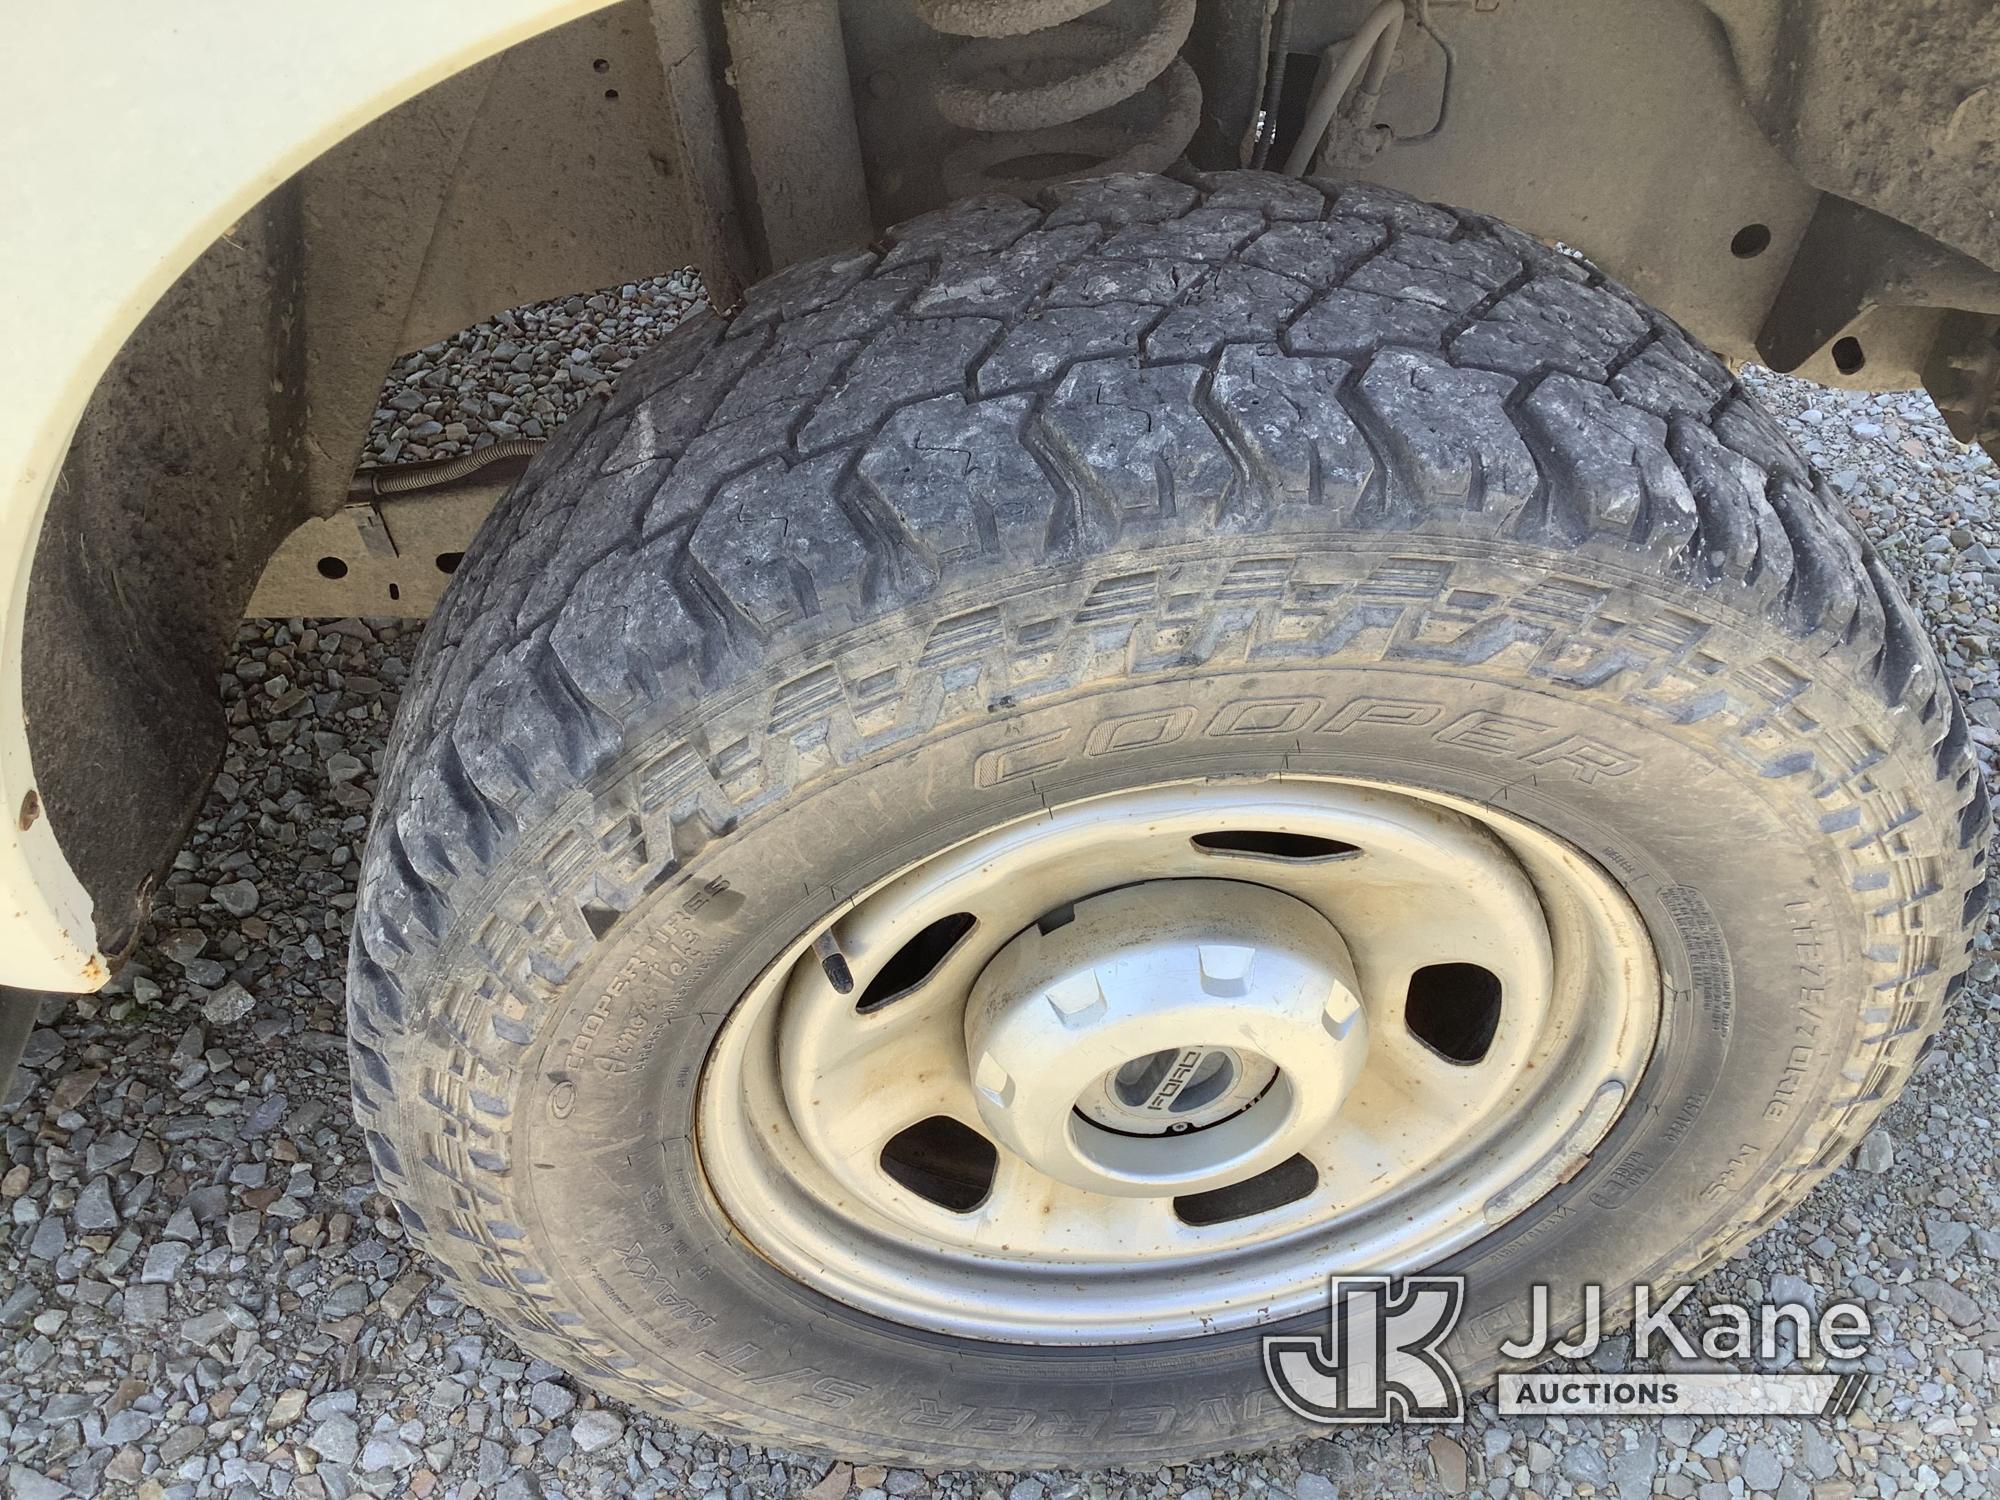 (Smock, PA) 2011 Ford F350 4x4 Extended-Cab Service Truck Runs & Moves, Rust Damage, Crane Condition